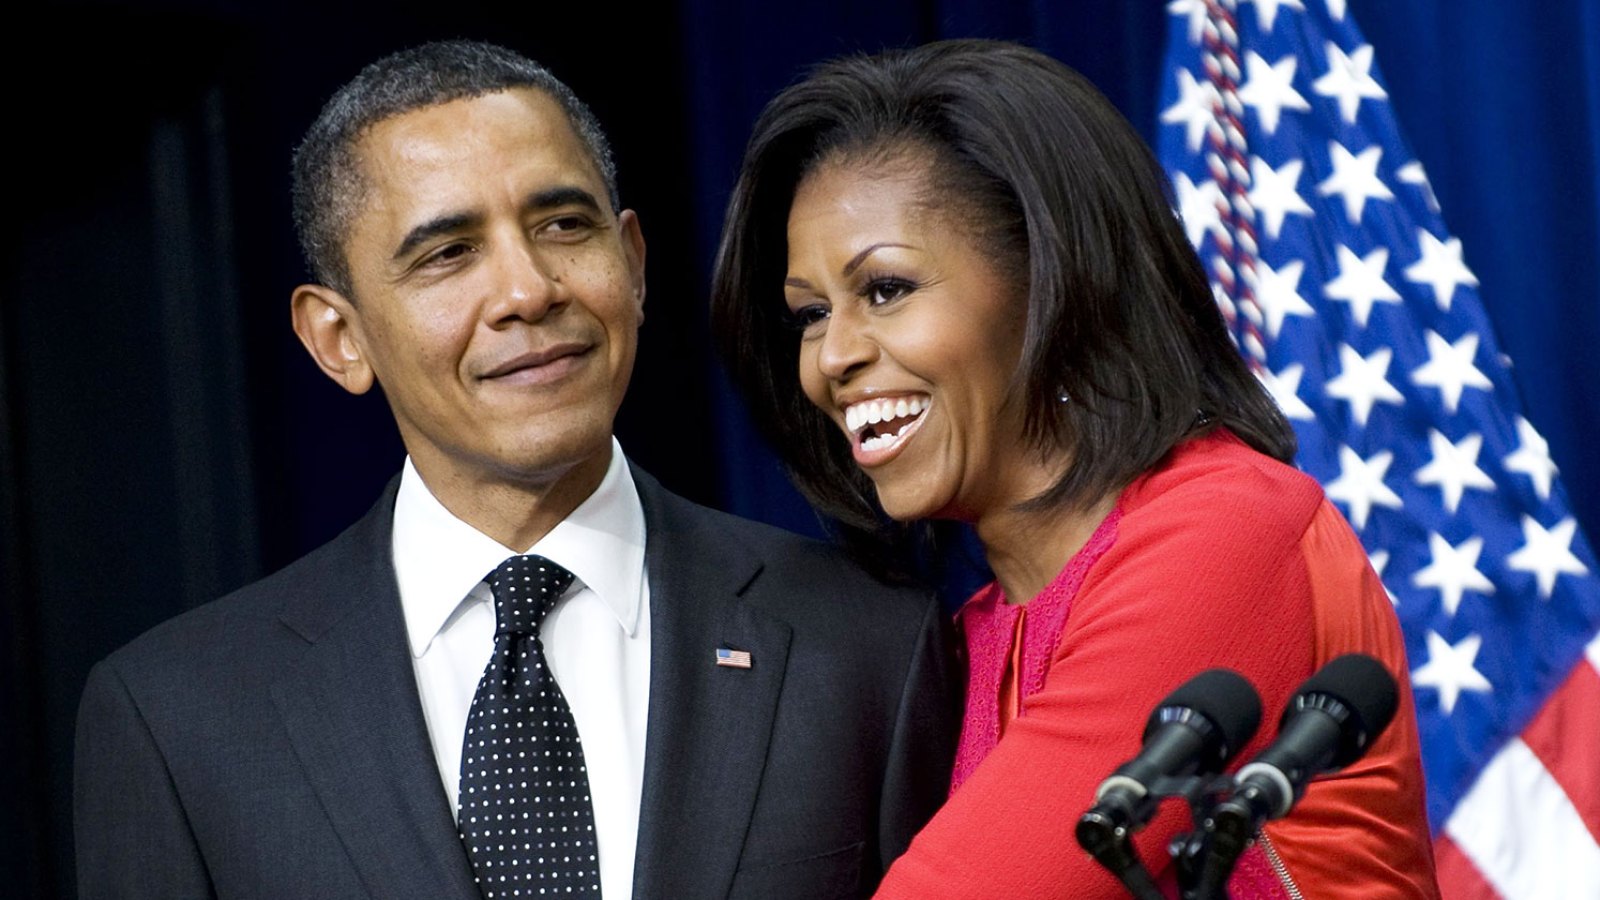 Michelle Obama Jokes She Has Wanted to Push Barack Out of the Window